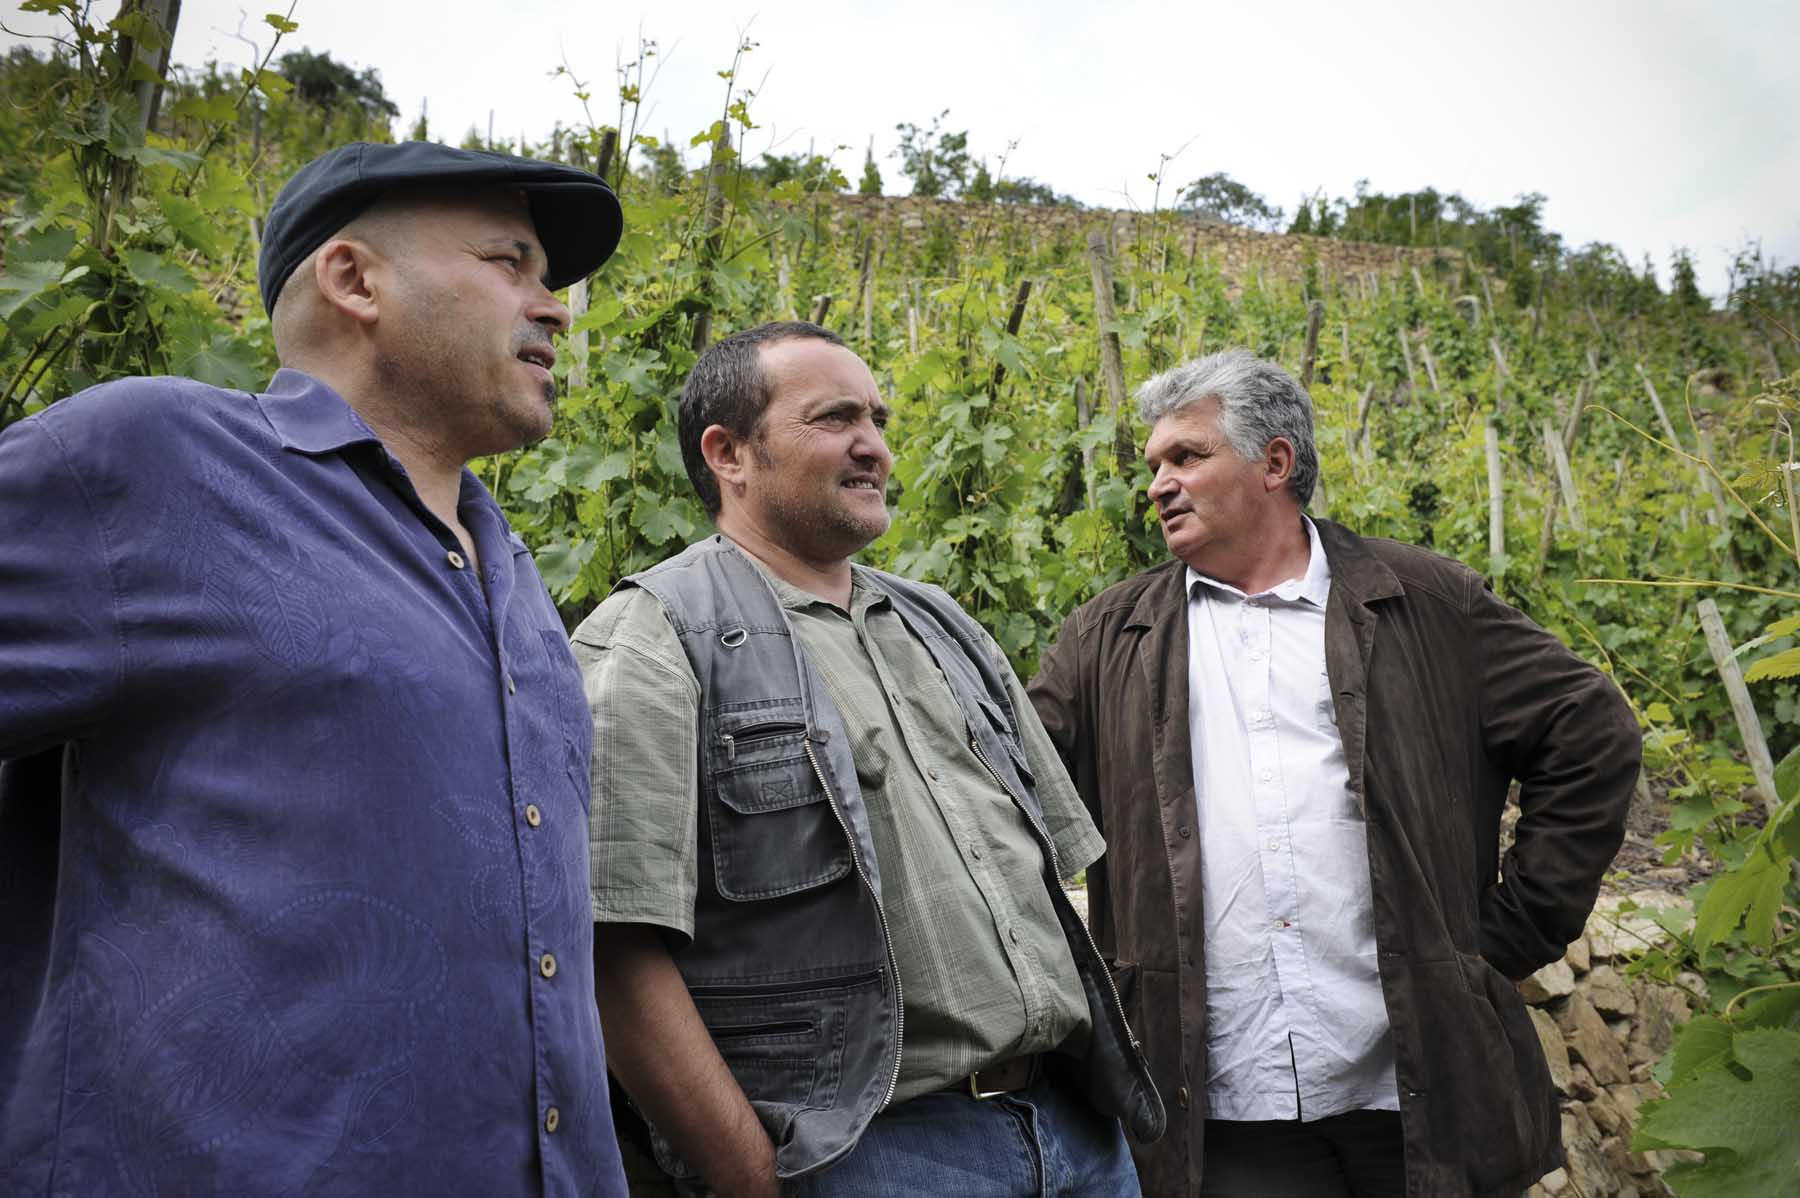 From left: Northern Rhone winemakers Francois Villard, Yves Cuilleron and Pierre Gaillard teamed up in 1996 to produce the Vins de Vienne label.